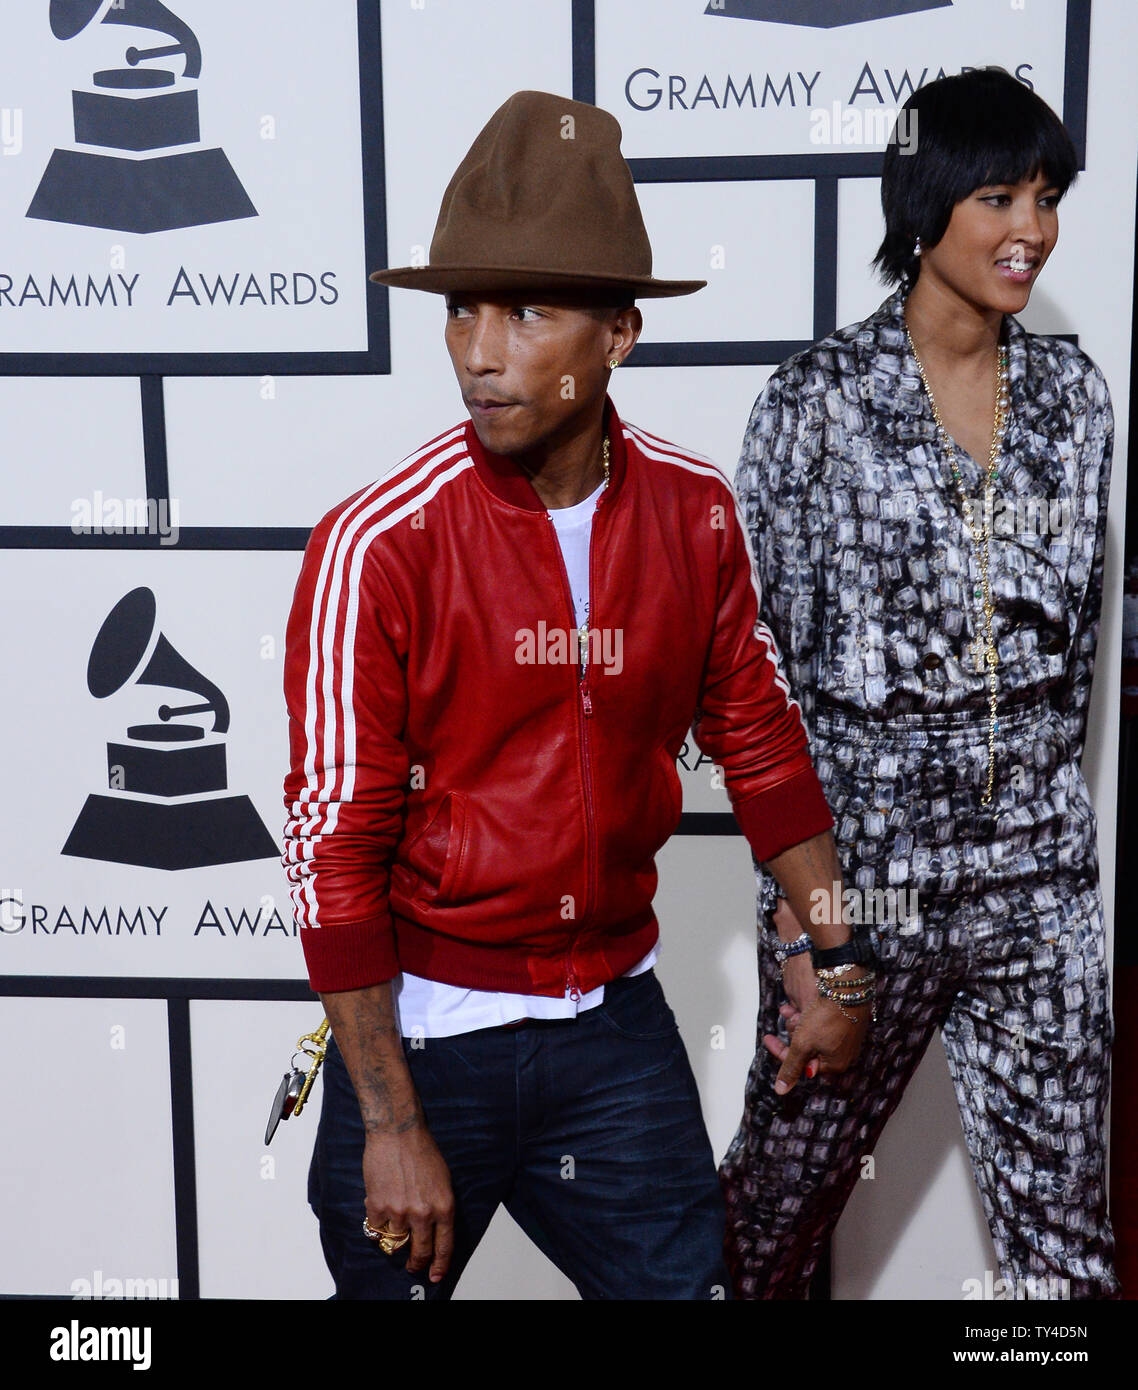 Photo: Pharrell Williams Attends the 65th Grammy Awards in Los Angeles -  LAP20230205579 